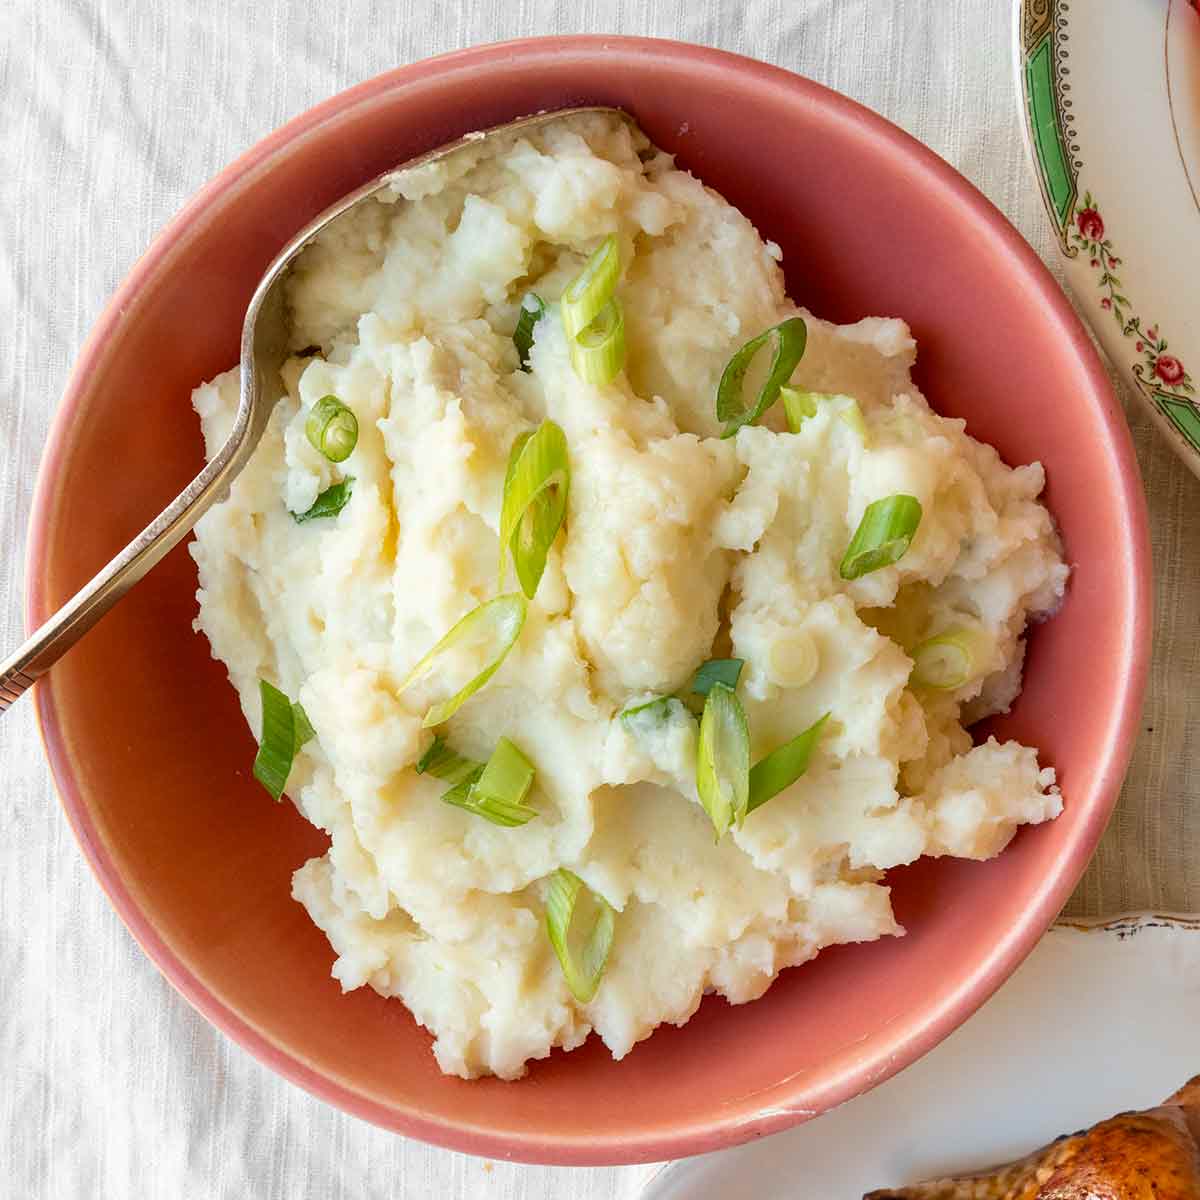 A bowl of cheesy mashed potatoes, topped with scallions on a table with turkey and cranberry sauce.